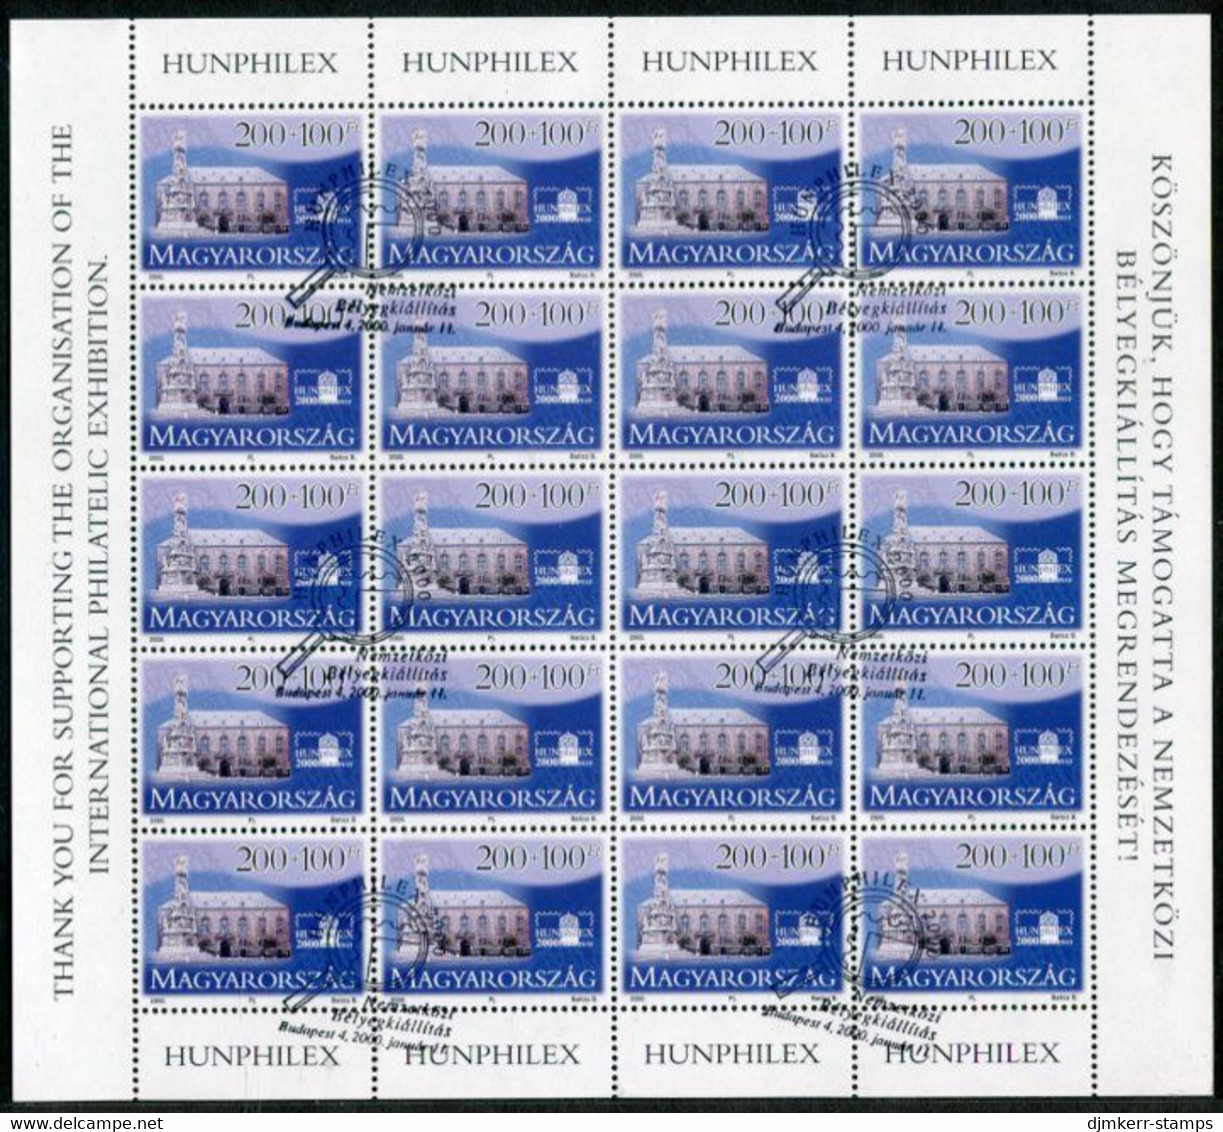 HUNGARY 2000 HUNPHILEX Stamp Exhibition. Sheet Of 20, Cancelled.  Michel 4578 - Hojas Bloque